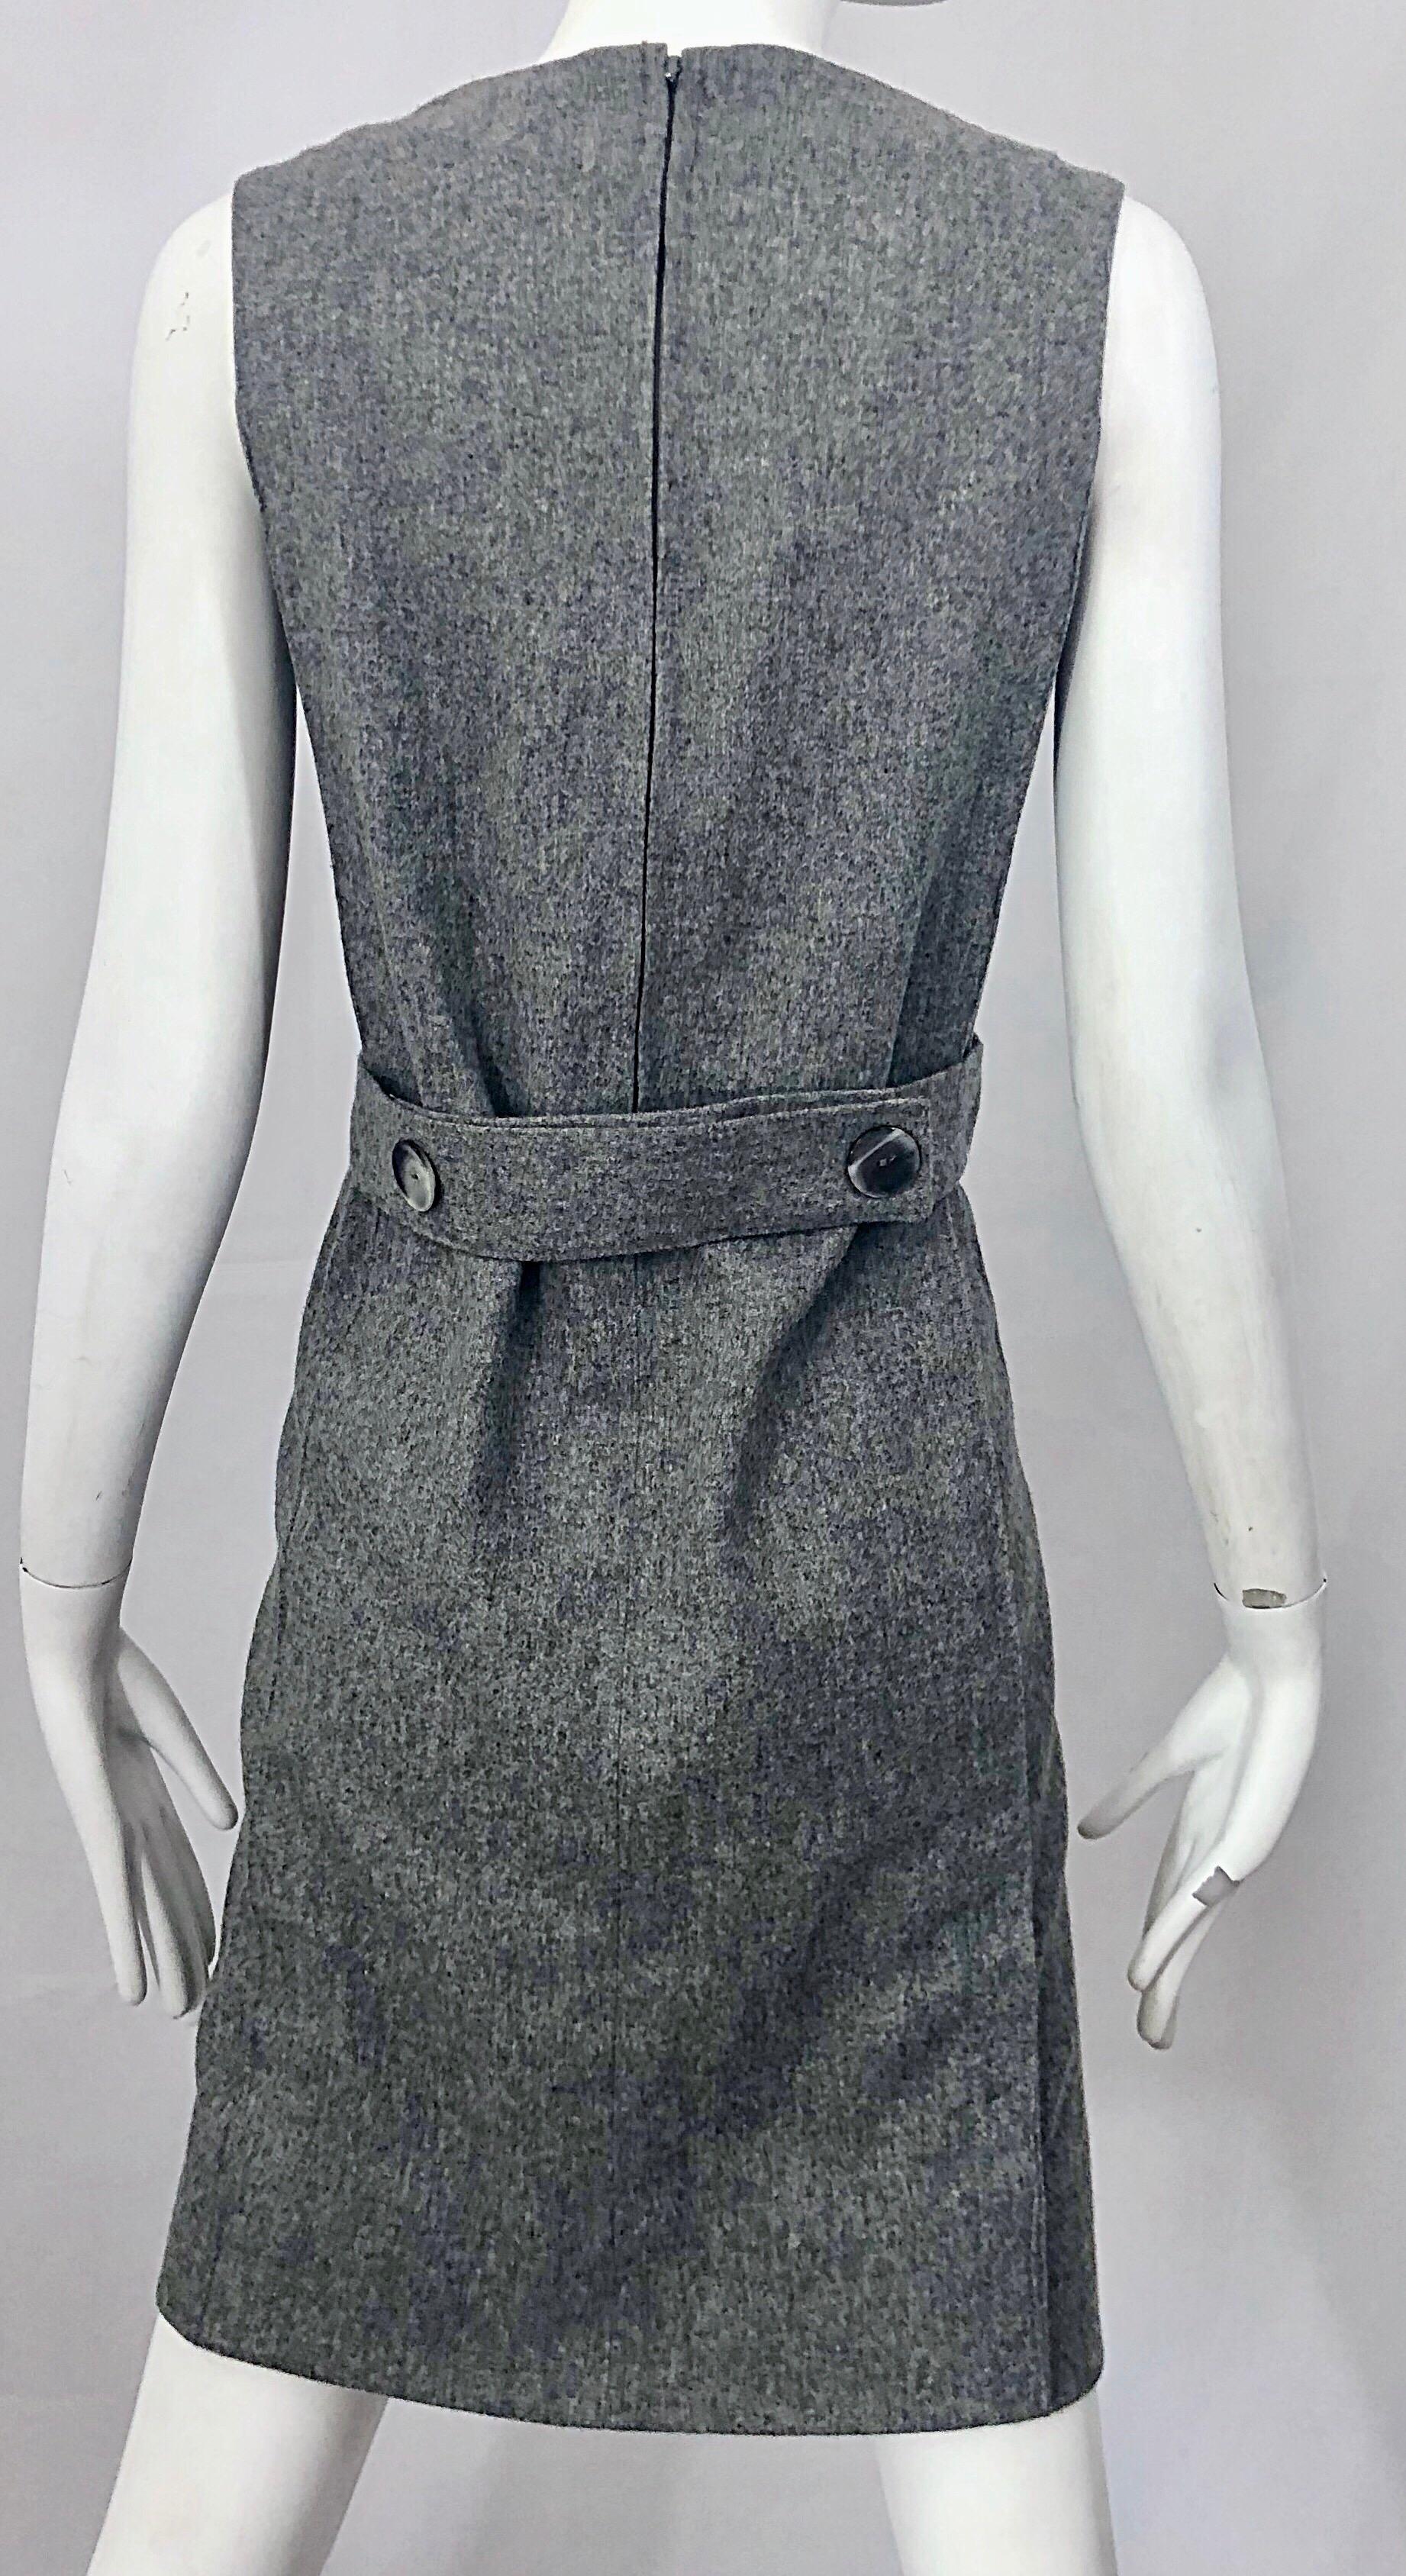 Chic 1960s Heather Gray Wool Sleeveless Vintage 60s Mod Shift Dress For Sale 5